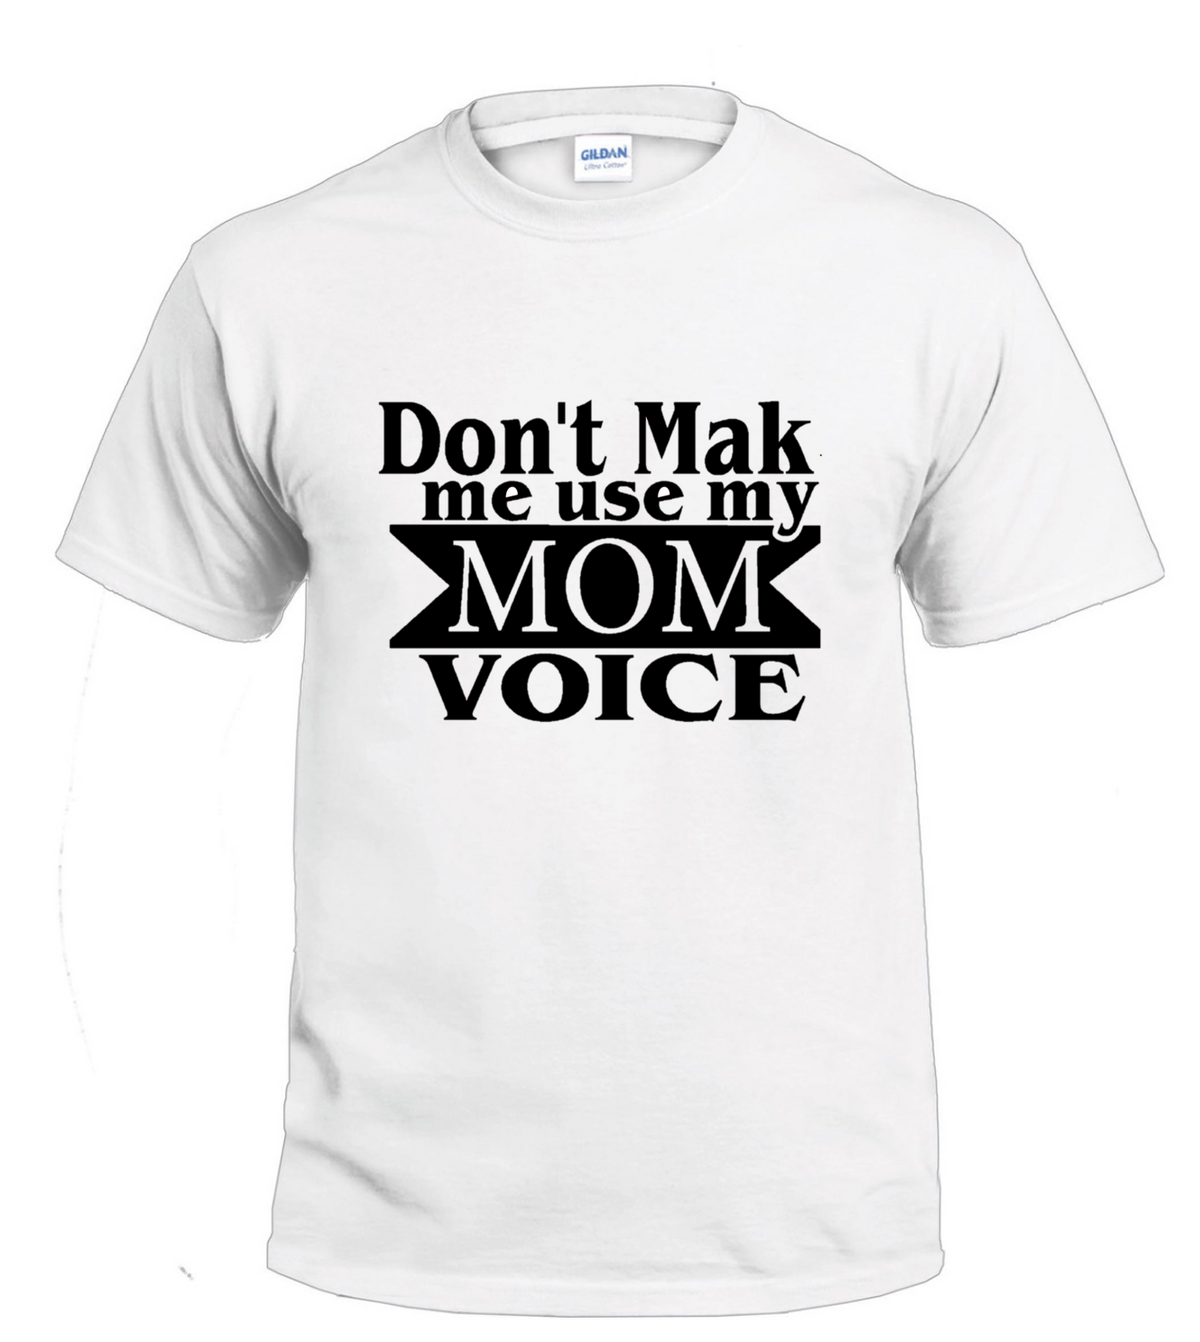 Don't Make Me Use My Mom Voice t-shirt